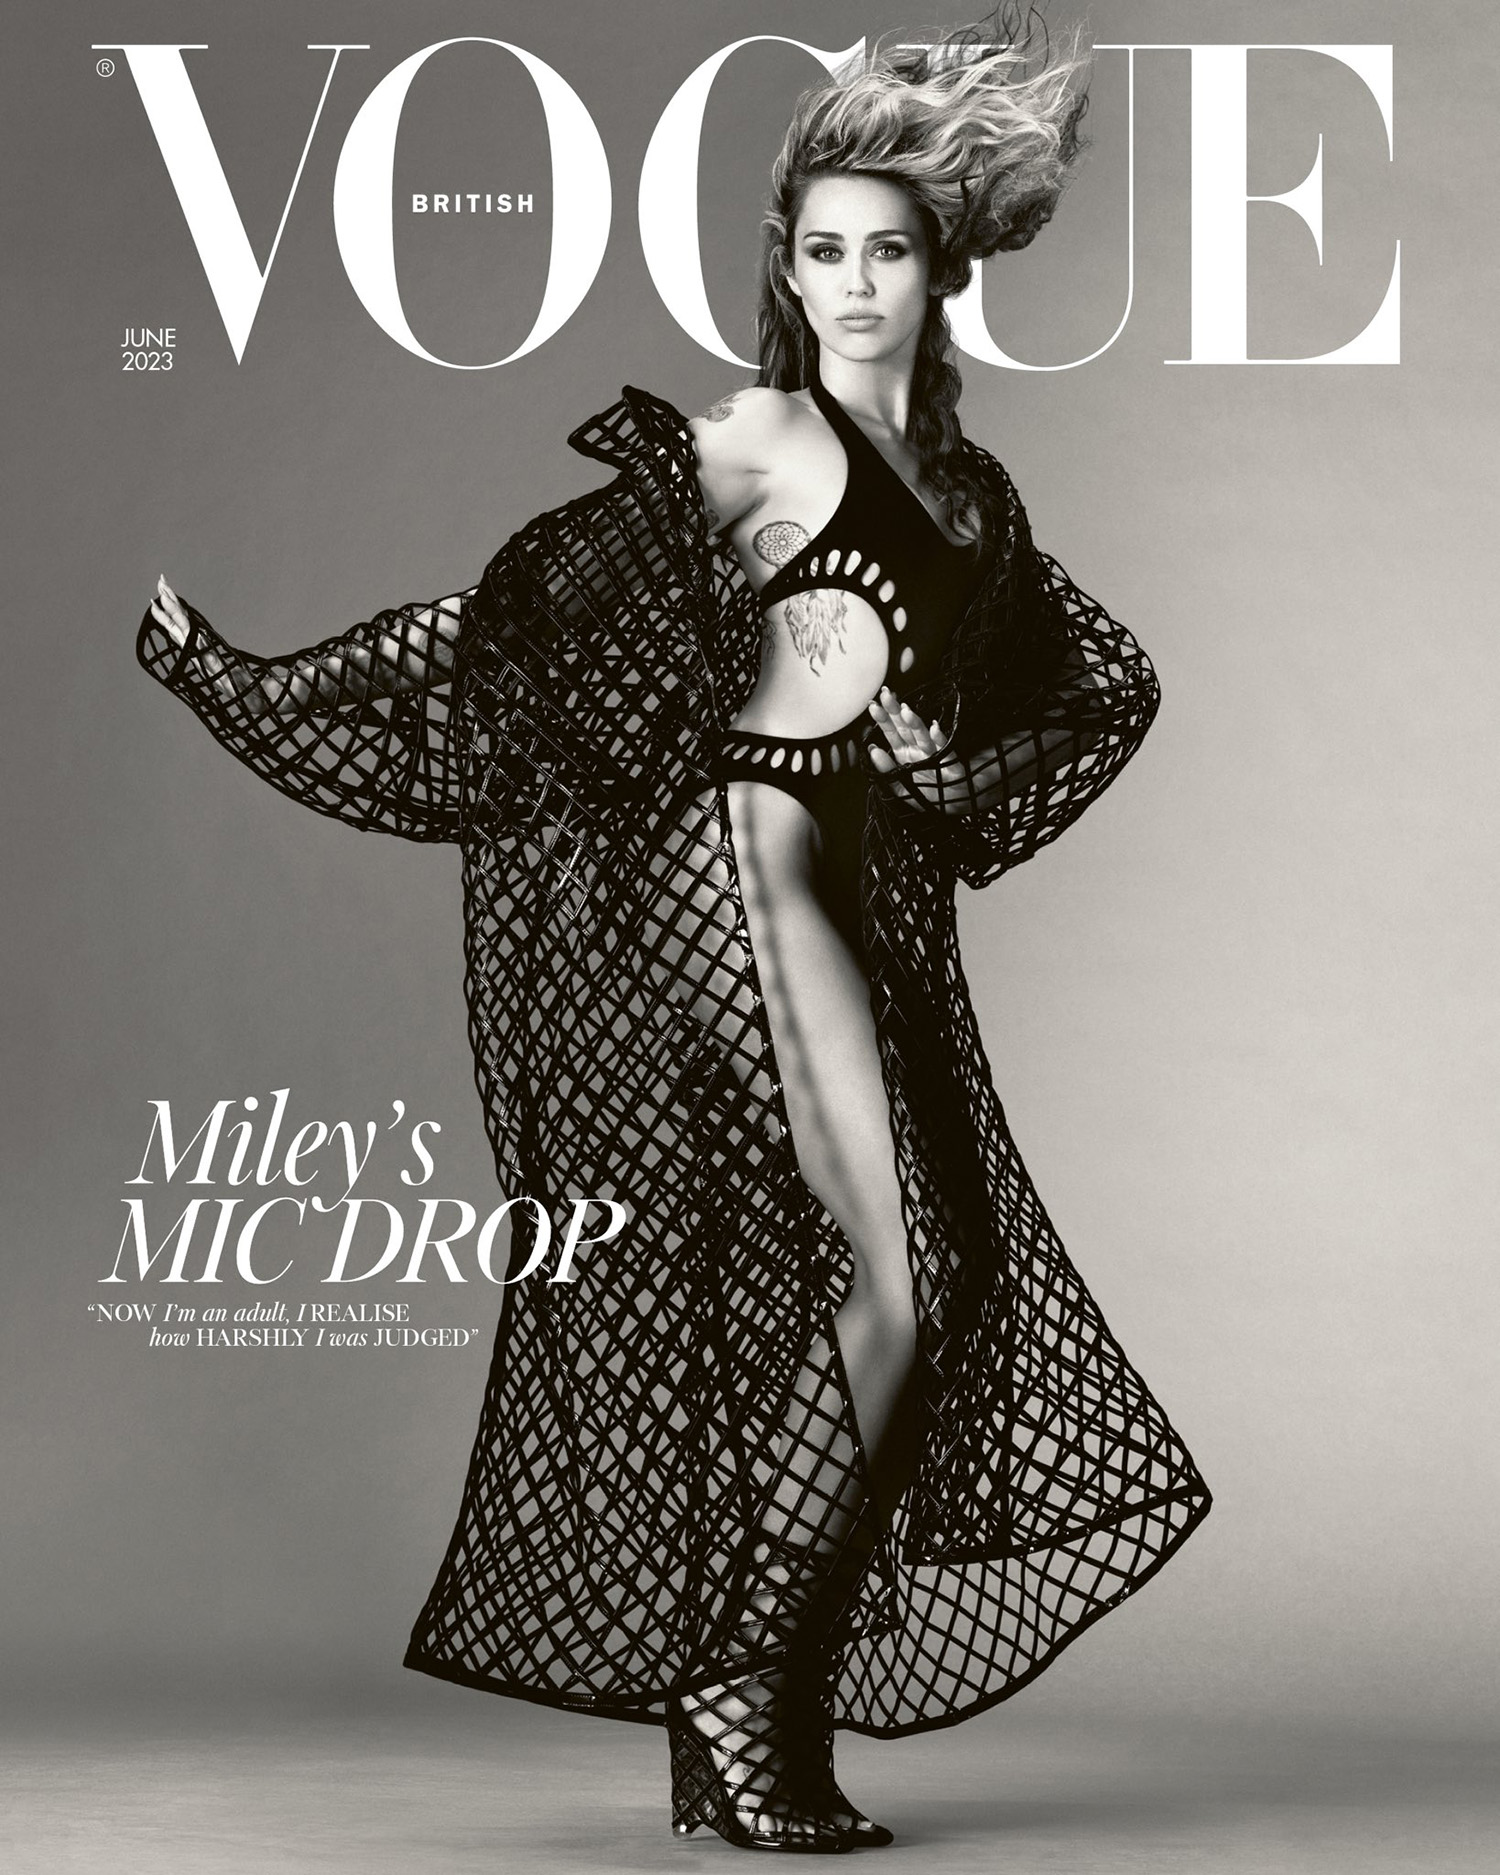 Miley Cyrus covers British Vogue June 2023 by Steven Meisel